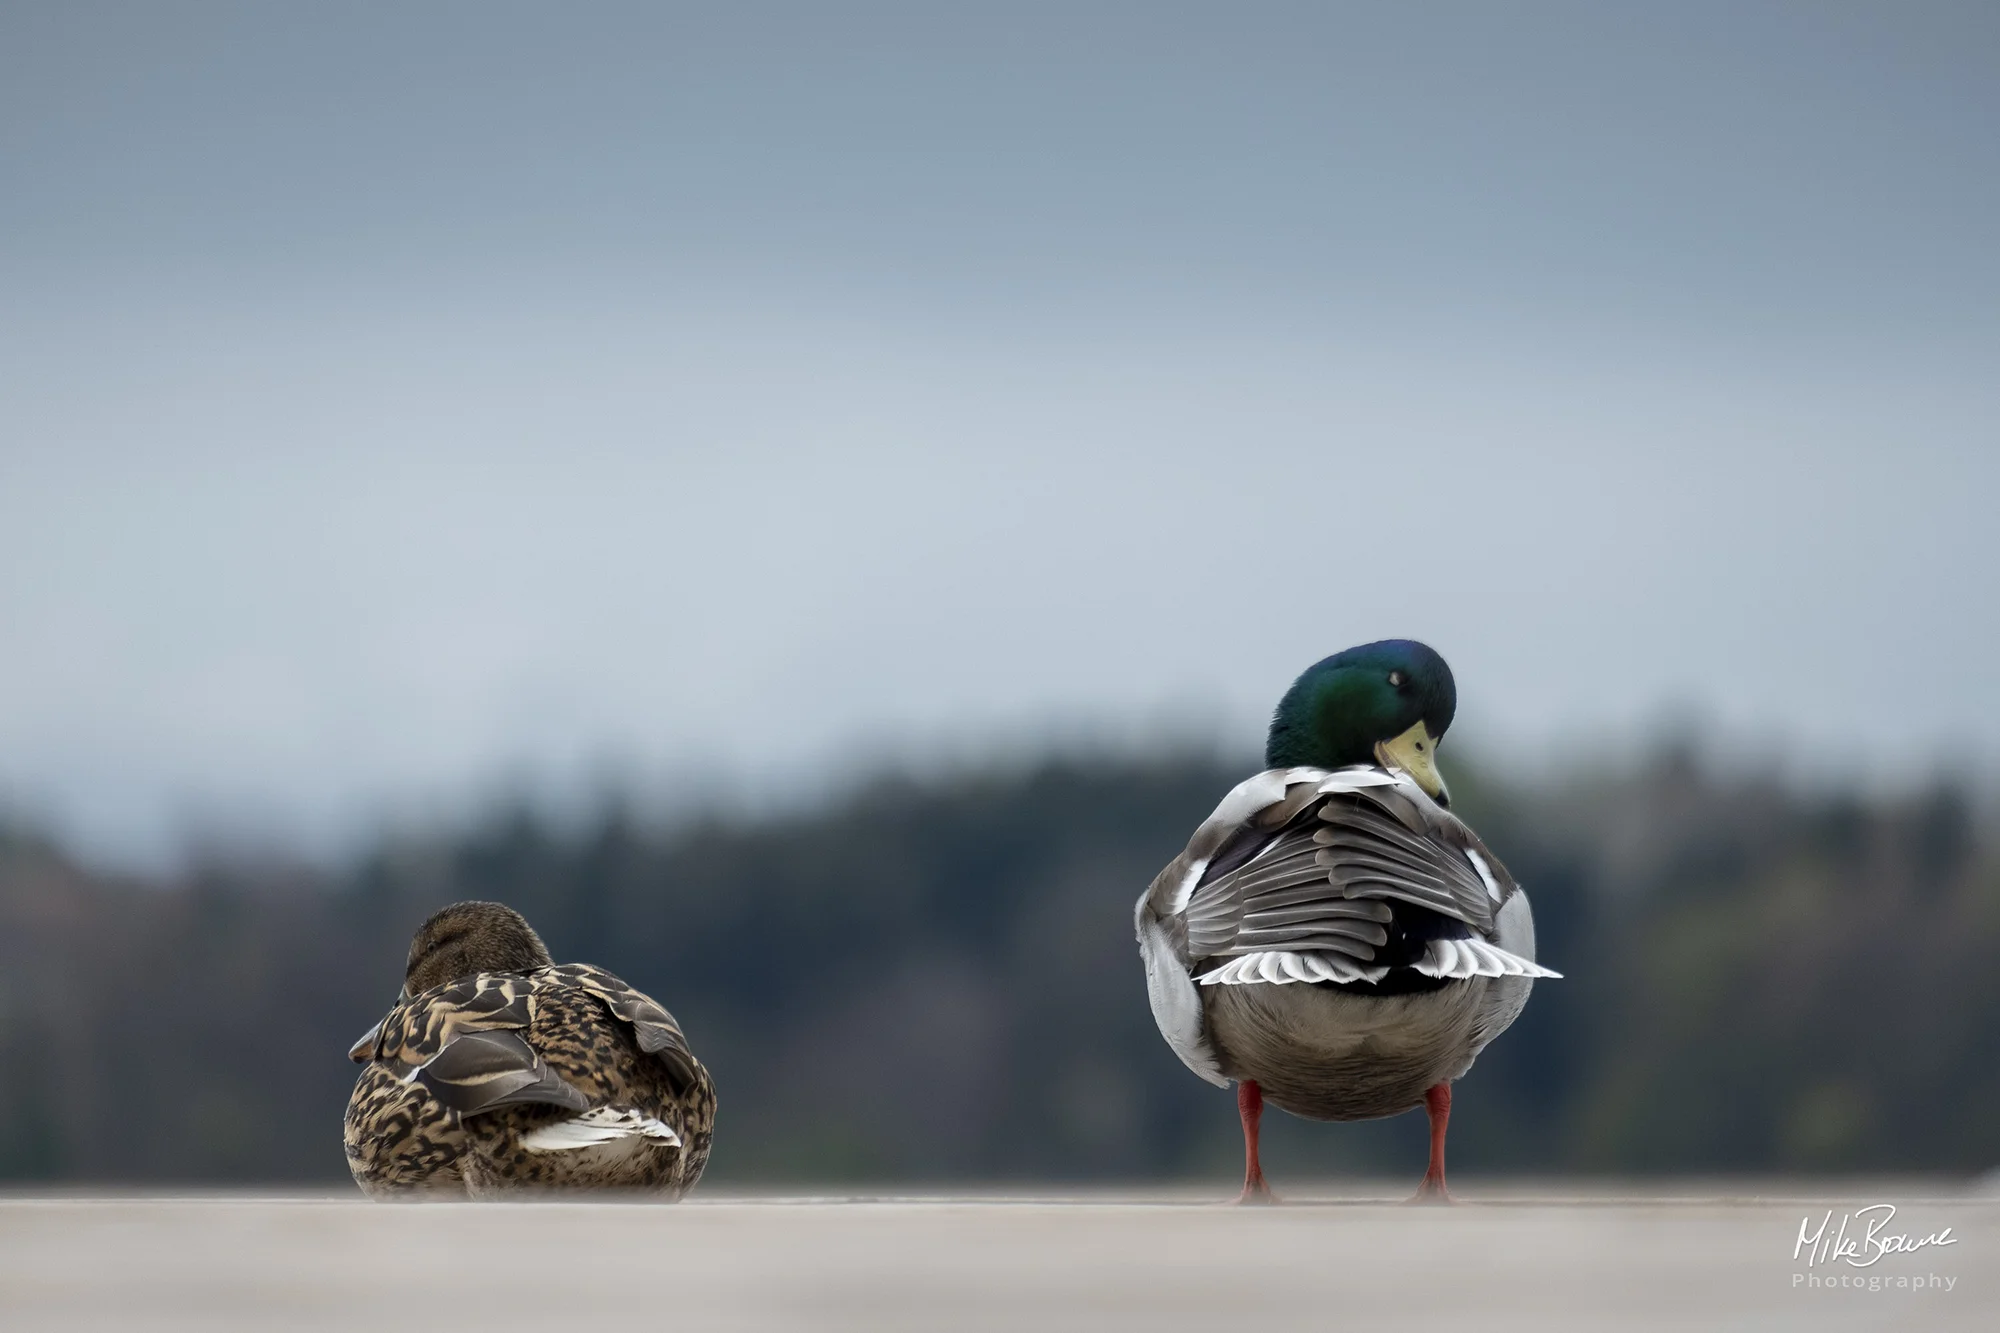 Two ducks agains a blurred background